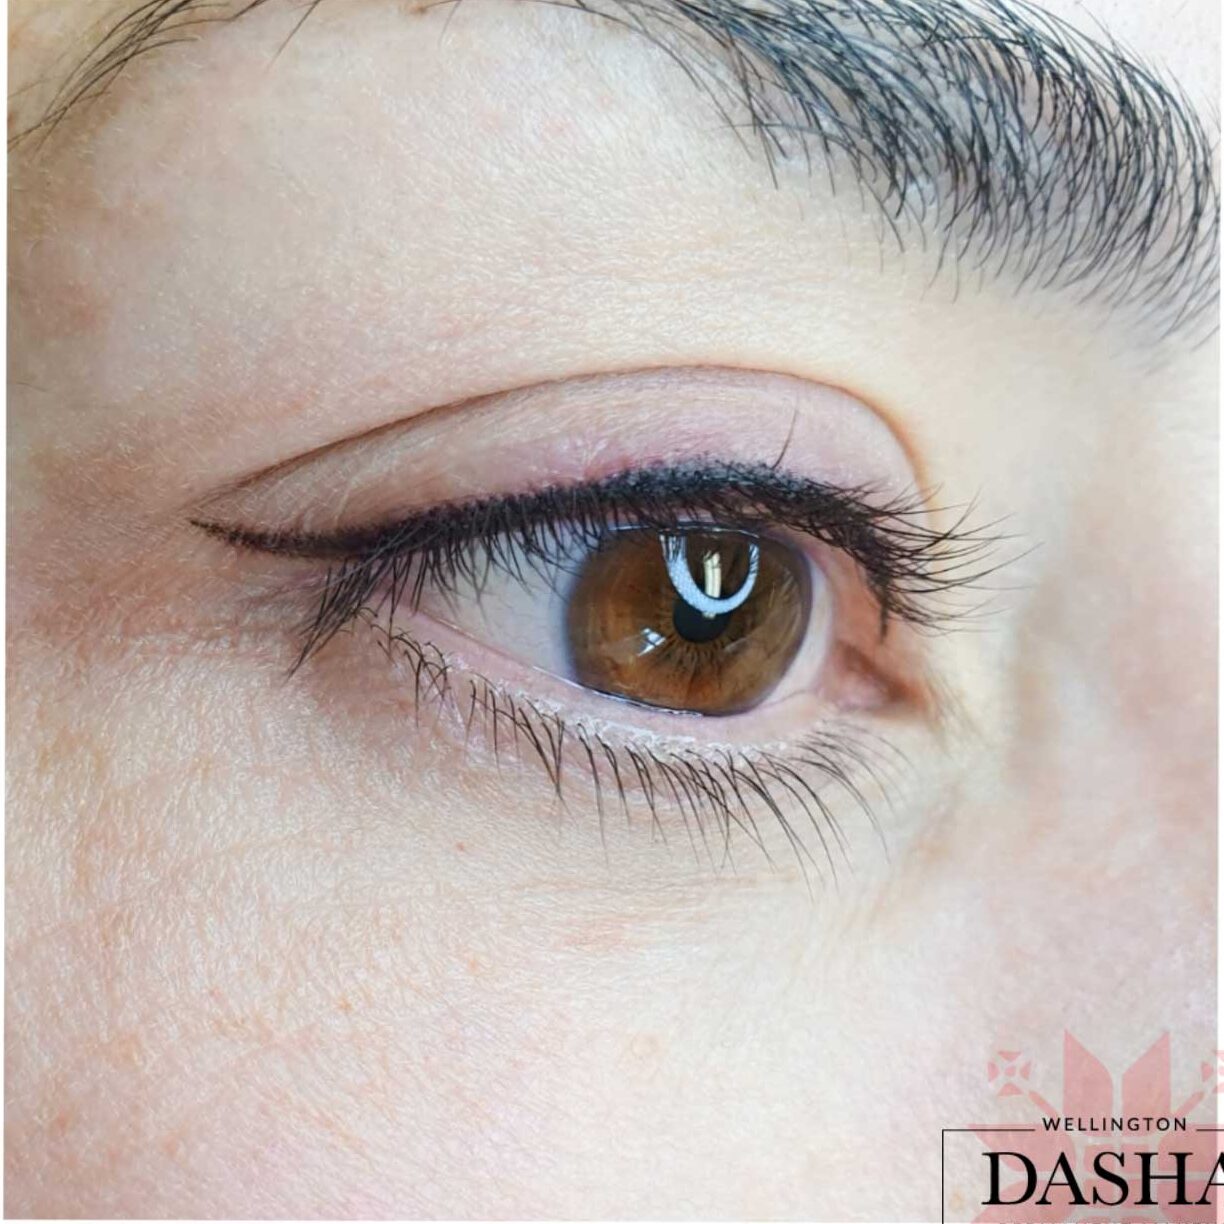 Eyeliner Cosmetic Tattoo. Cosmetic and Mediical Tattoo by Dasha. Permanent makeup and reconstructive tattoo, scalp micro-pigmentation in Christchurch, New Zealand